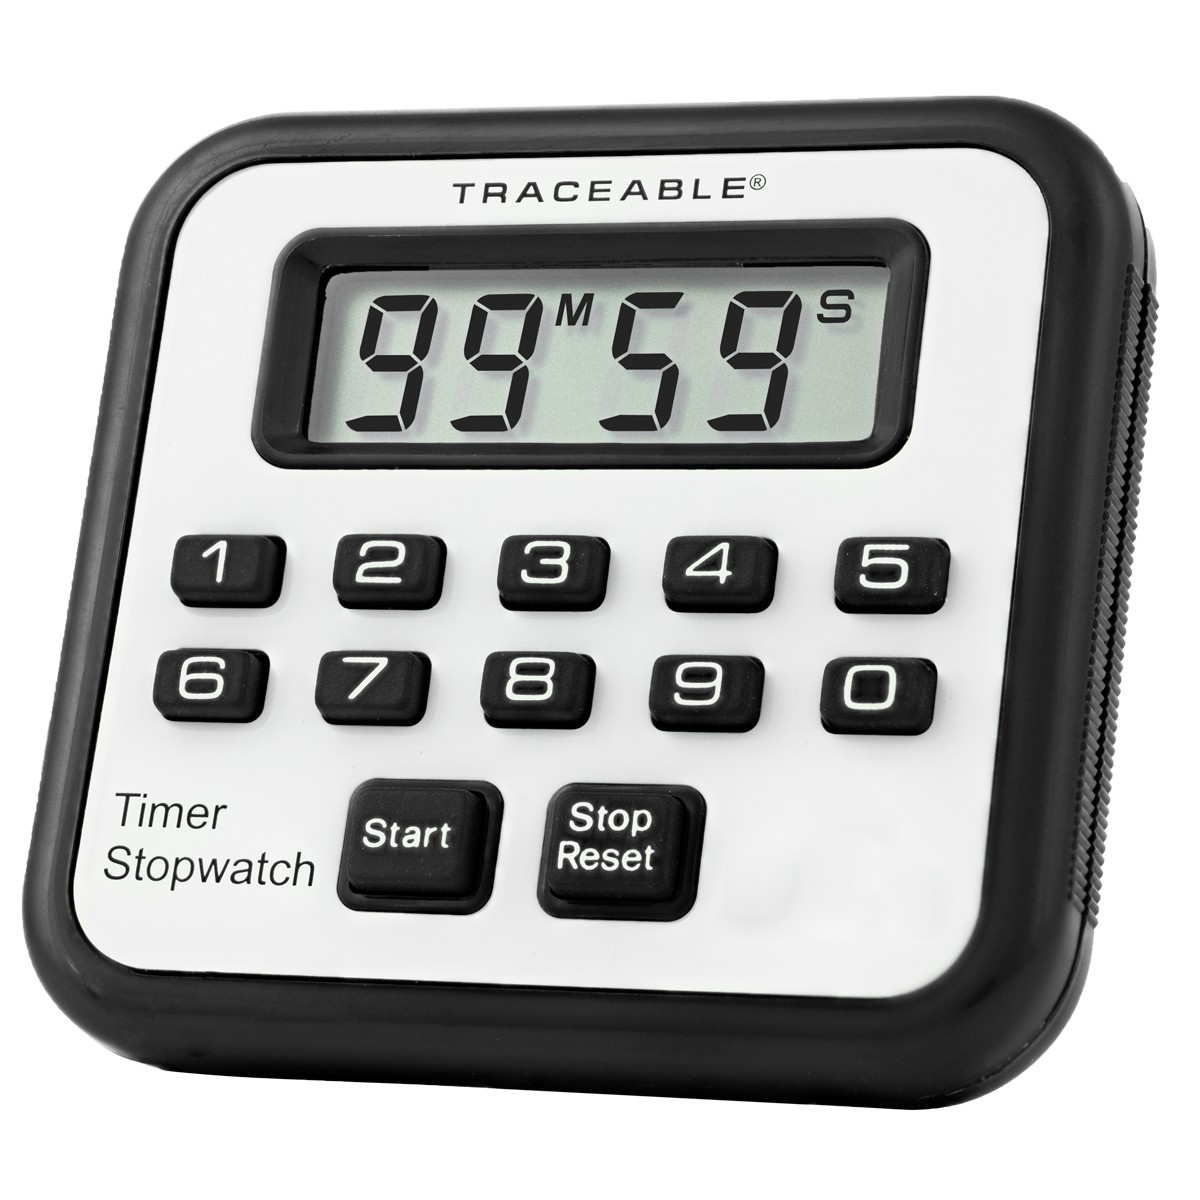 Alarm Traceable Timer/Stopwatch1200 x 1200